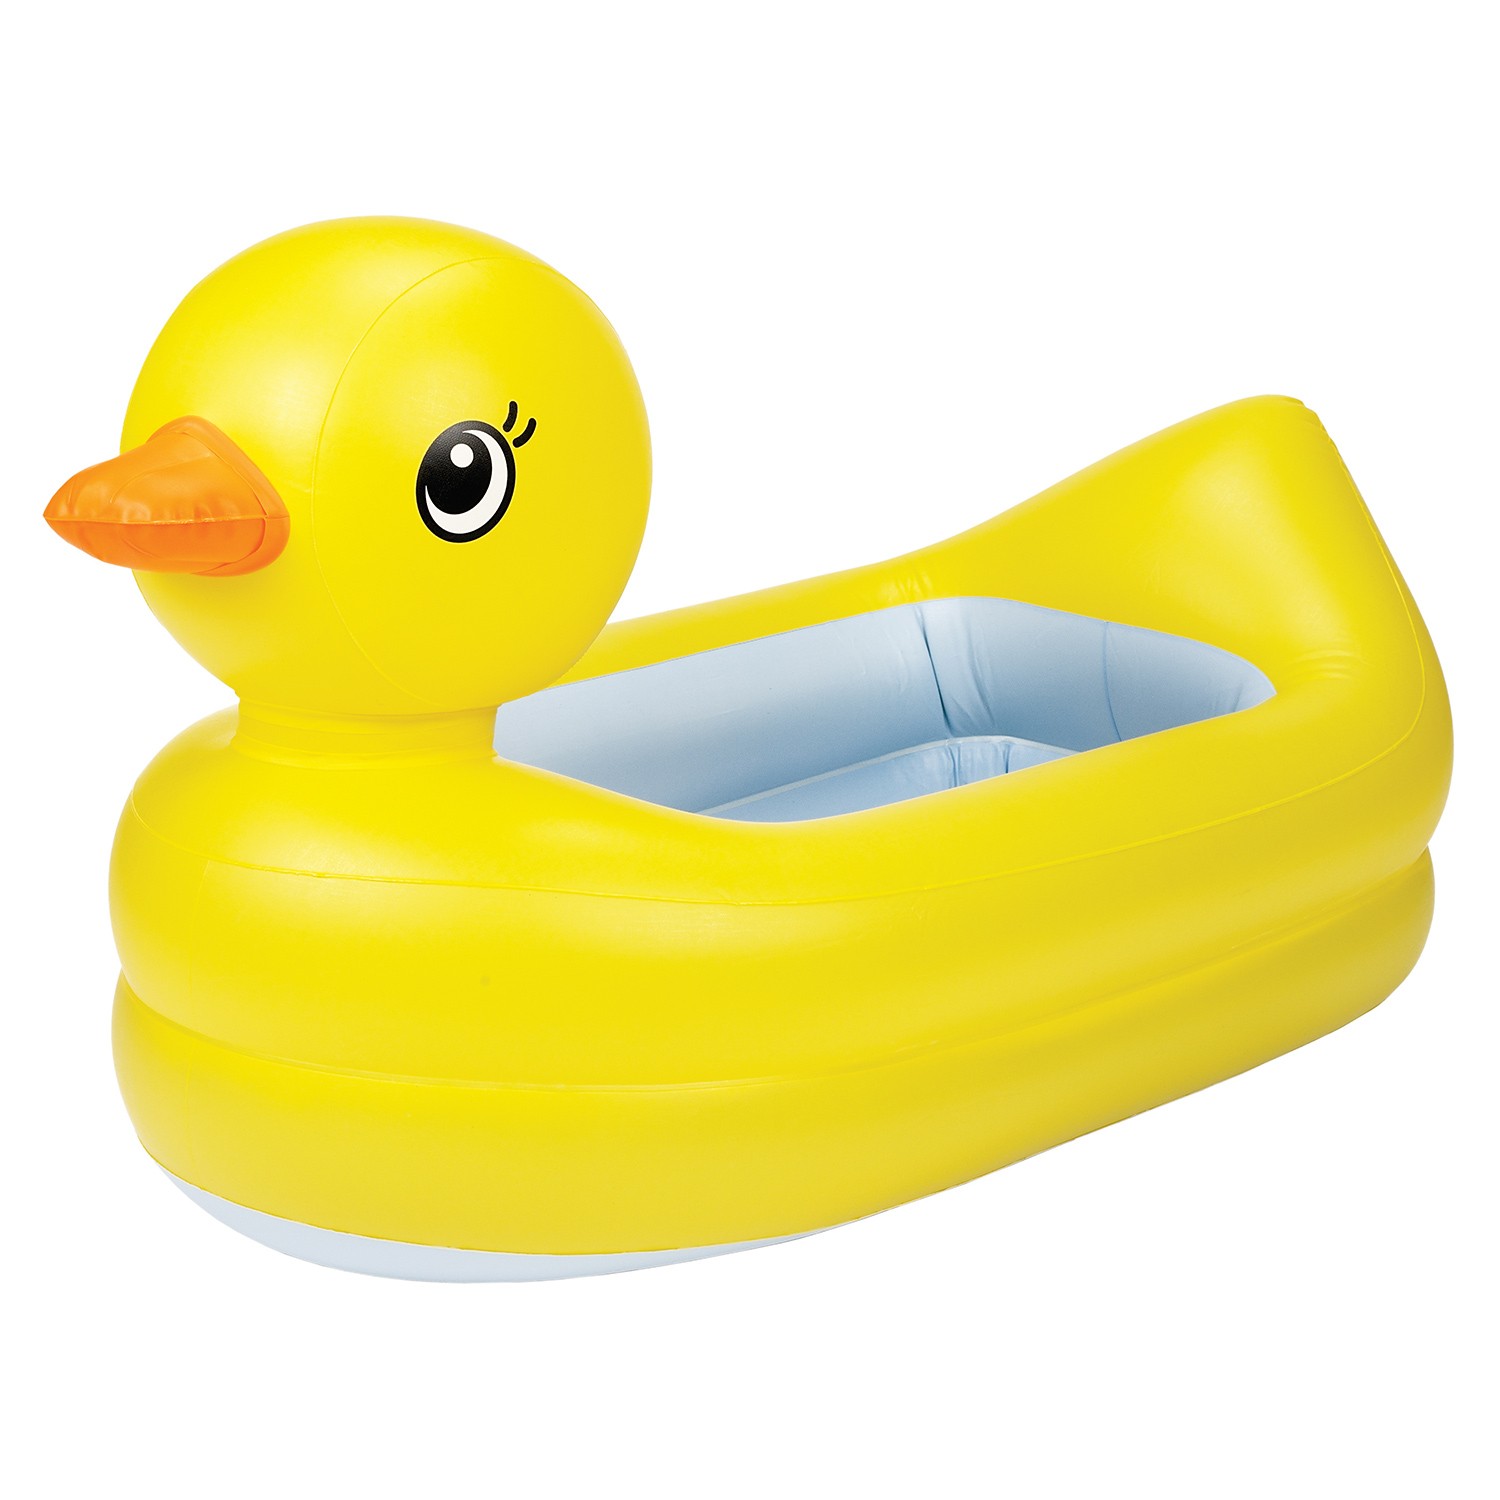 Munchkin White Hot® Inflatable Safety Duck